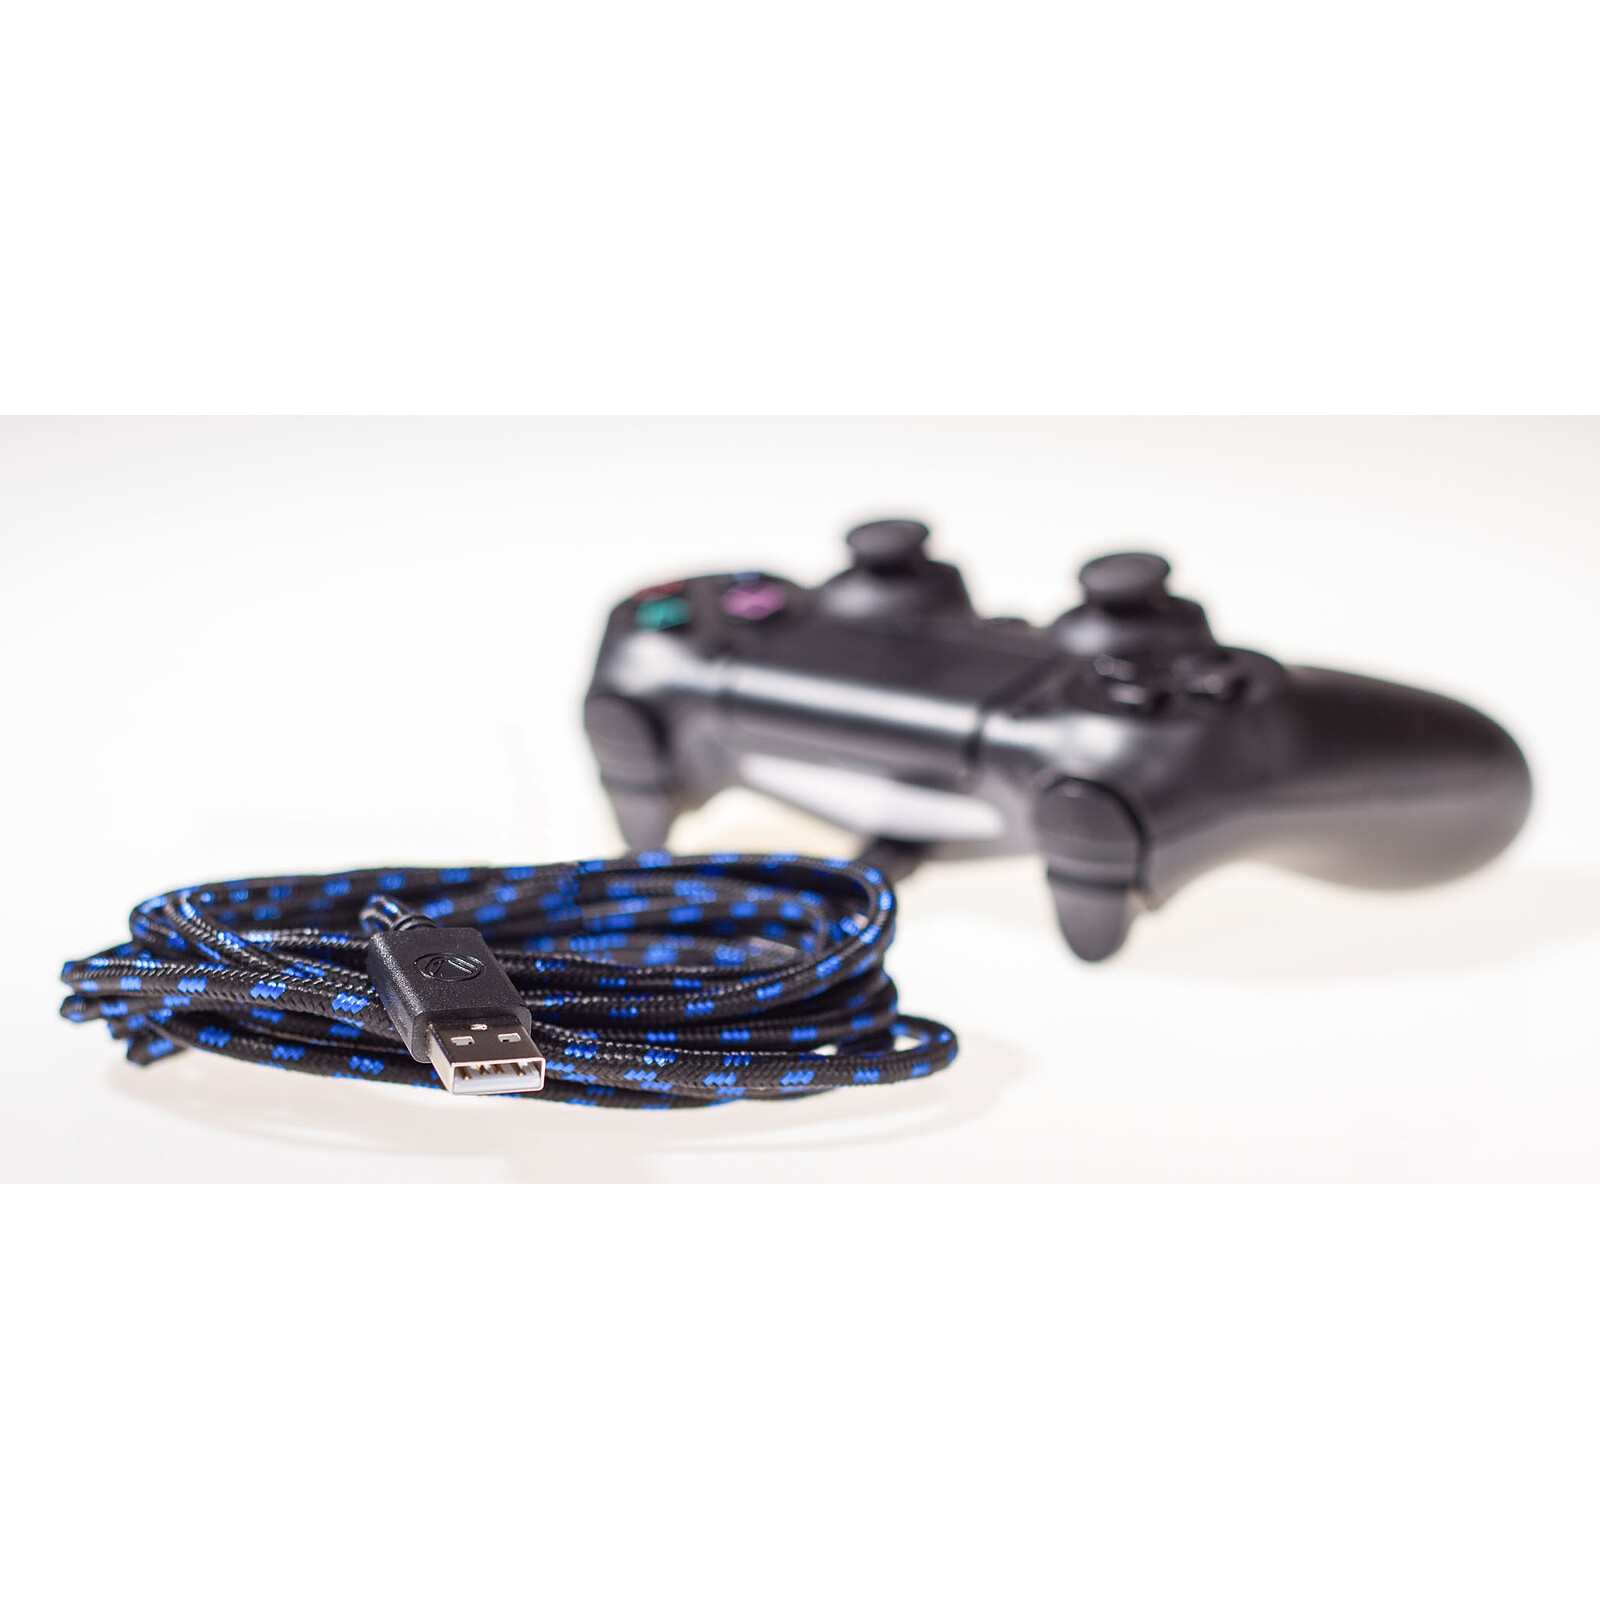 Sony PlayStation 4 DualShock USB Adapter for PC/Mac - Accessoires PS4 -  Garantie 3 ans LDLC